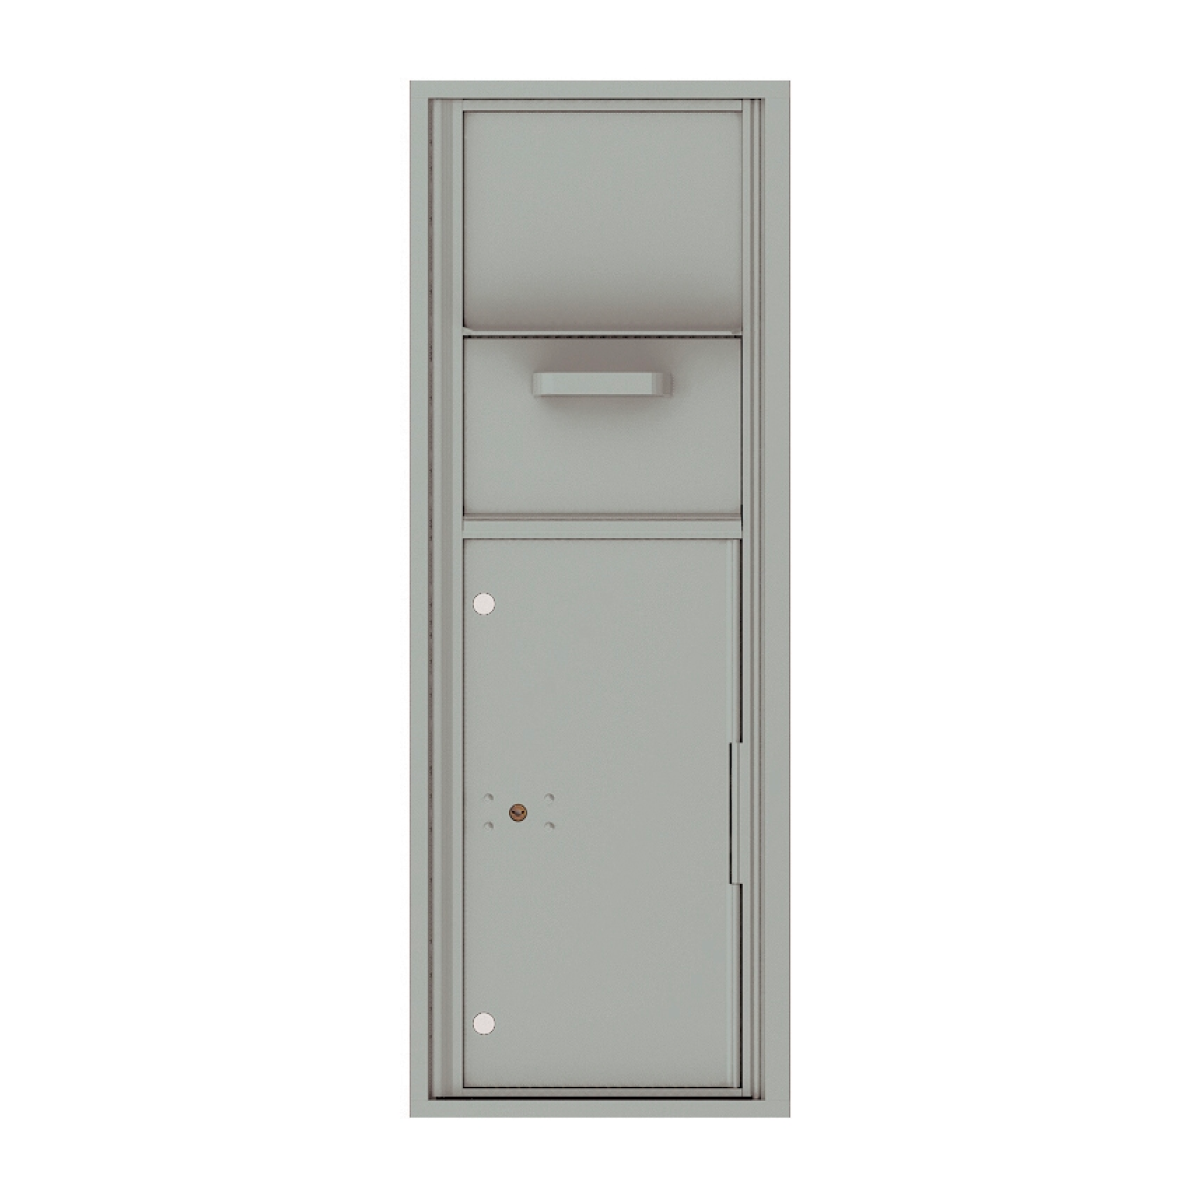 4C Mailboxes 4C13S-HOP Collection and Drop Box Product Image